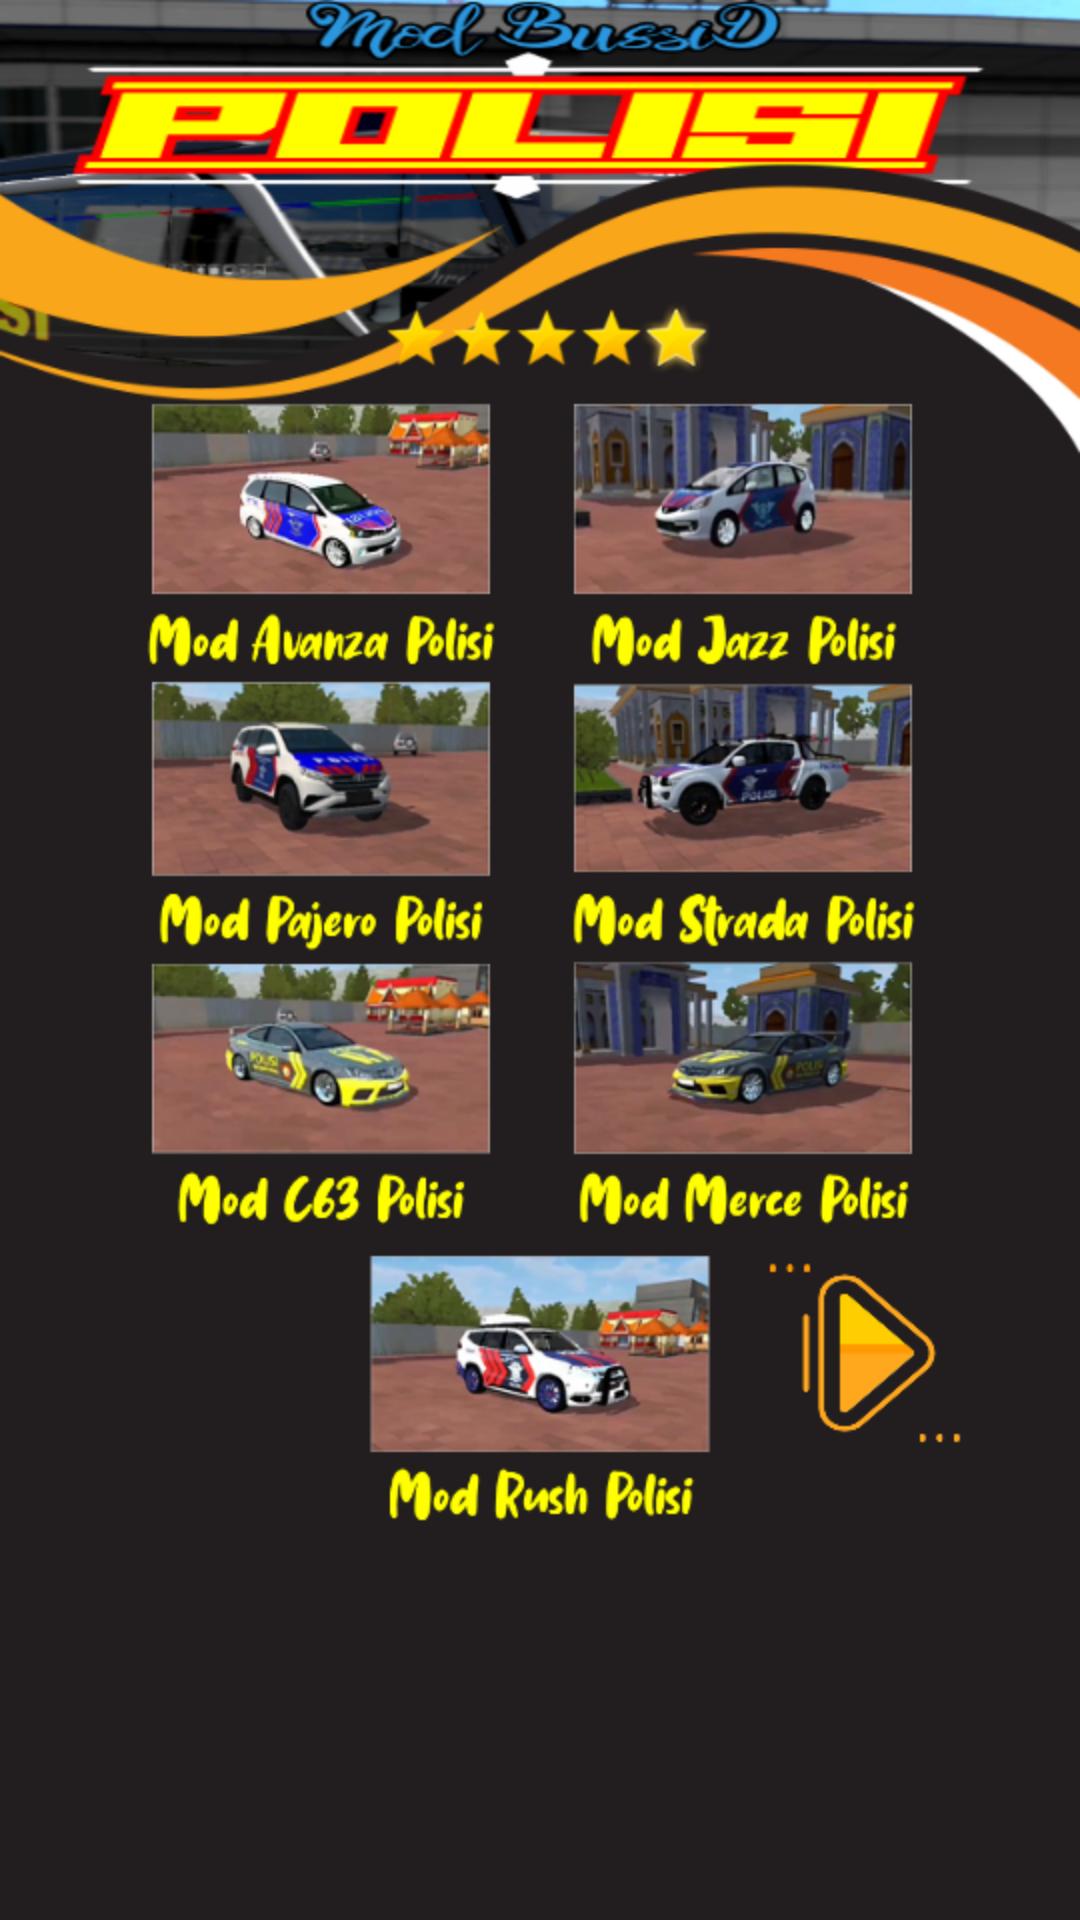 Mod Bussid Polisi Lengkap For Android Apk Download